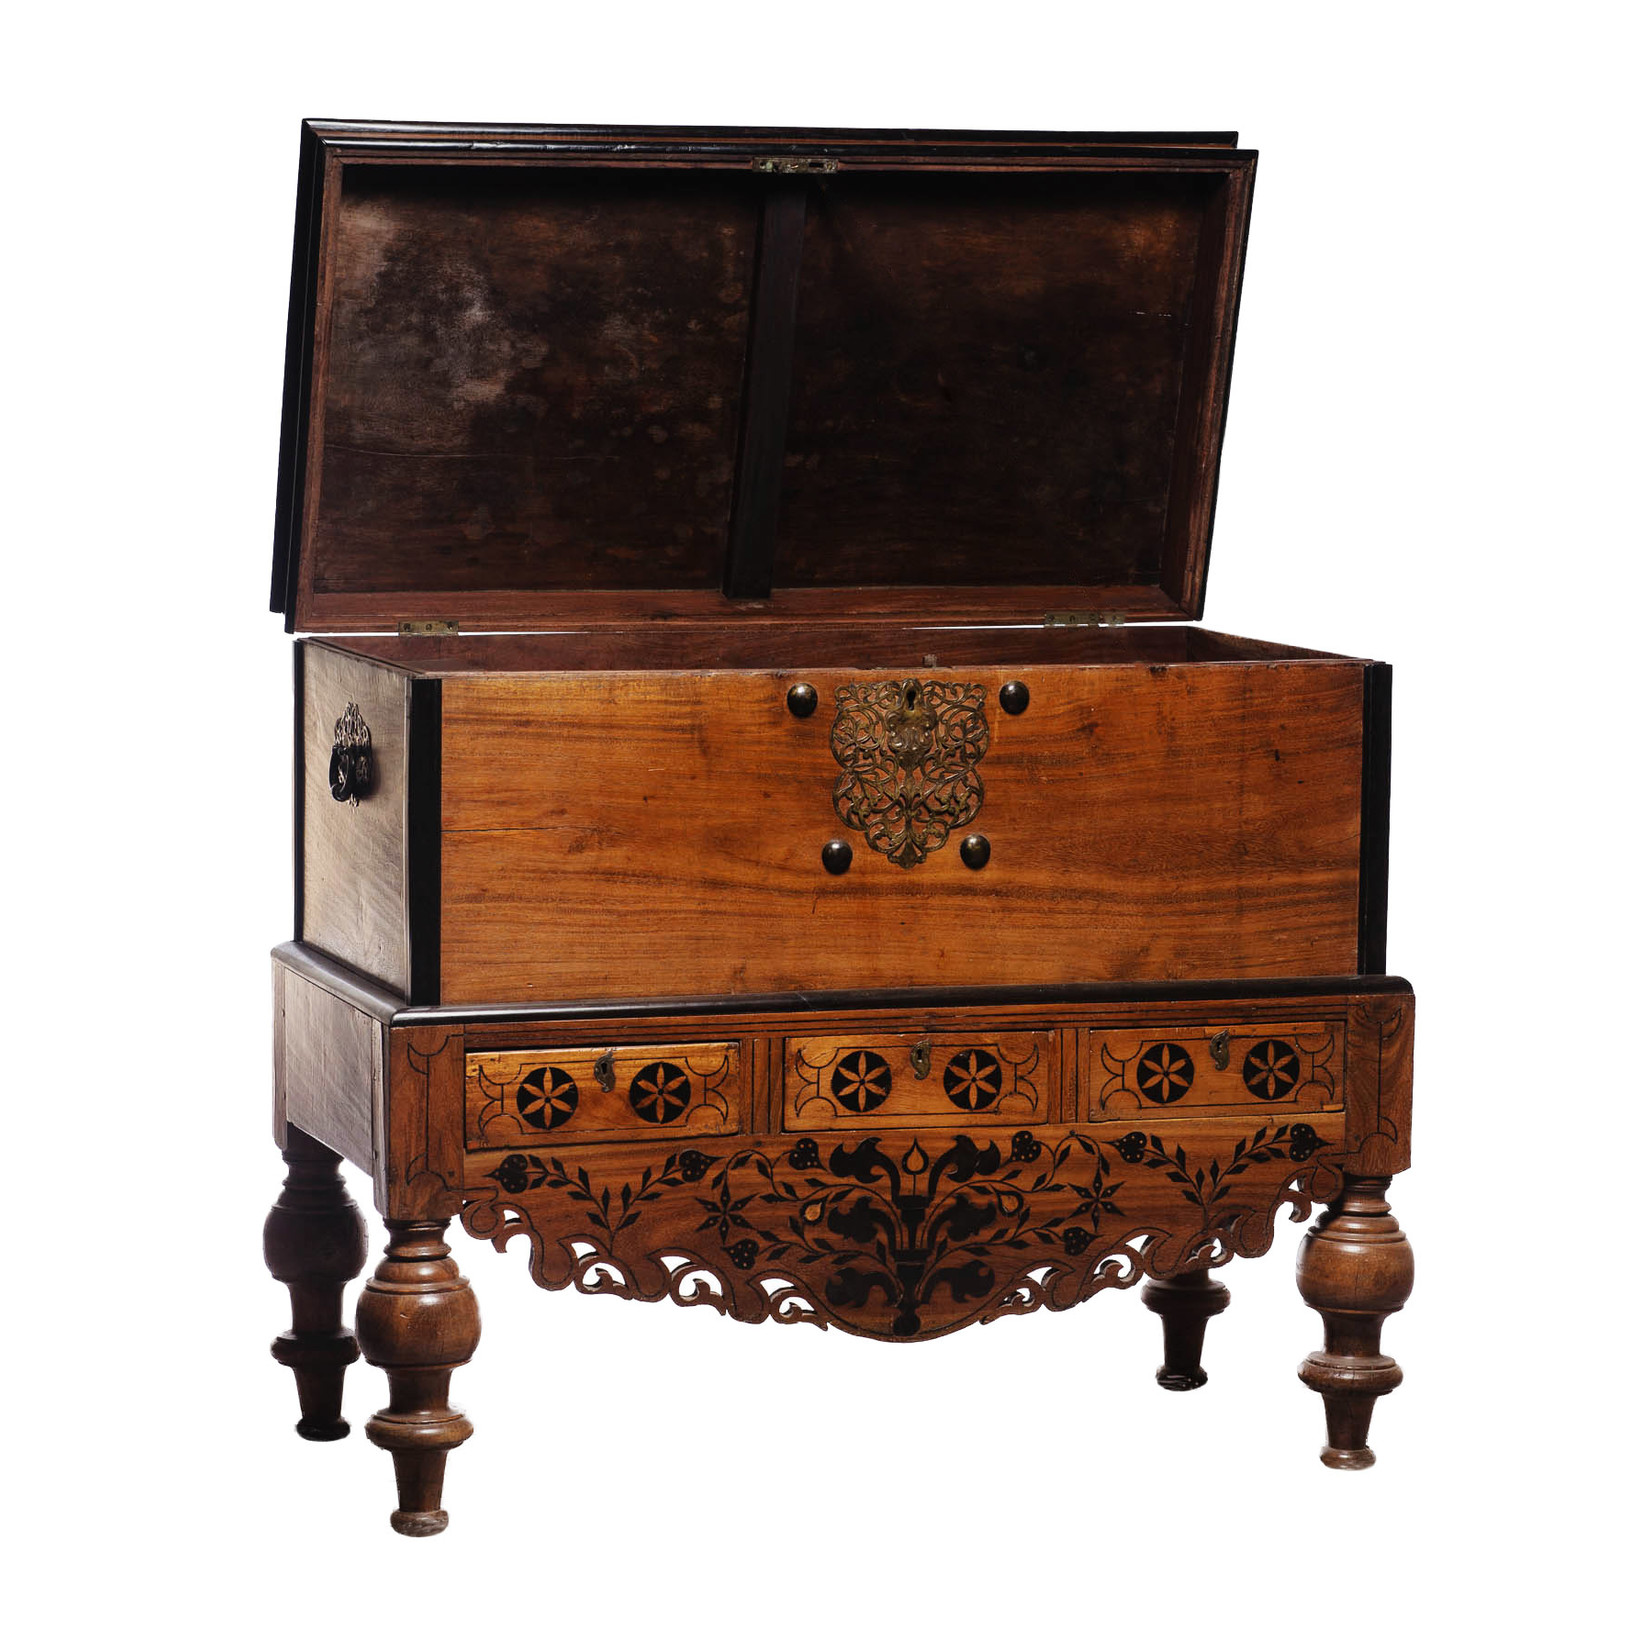 Lawrence Collection Dutch Colonial Style Teak, Ebony Wood Chest on Stand